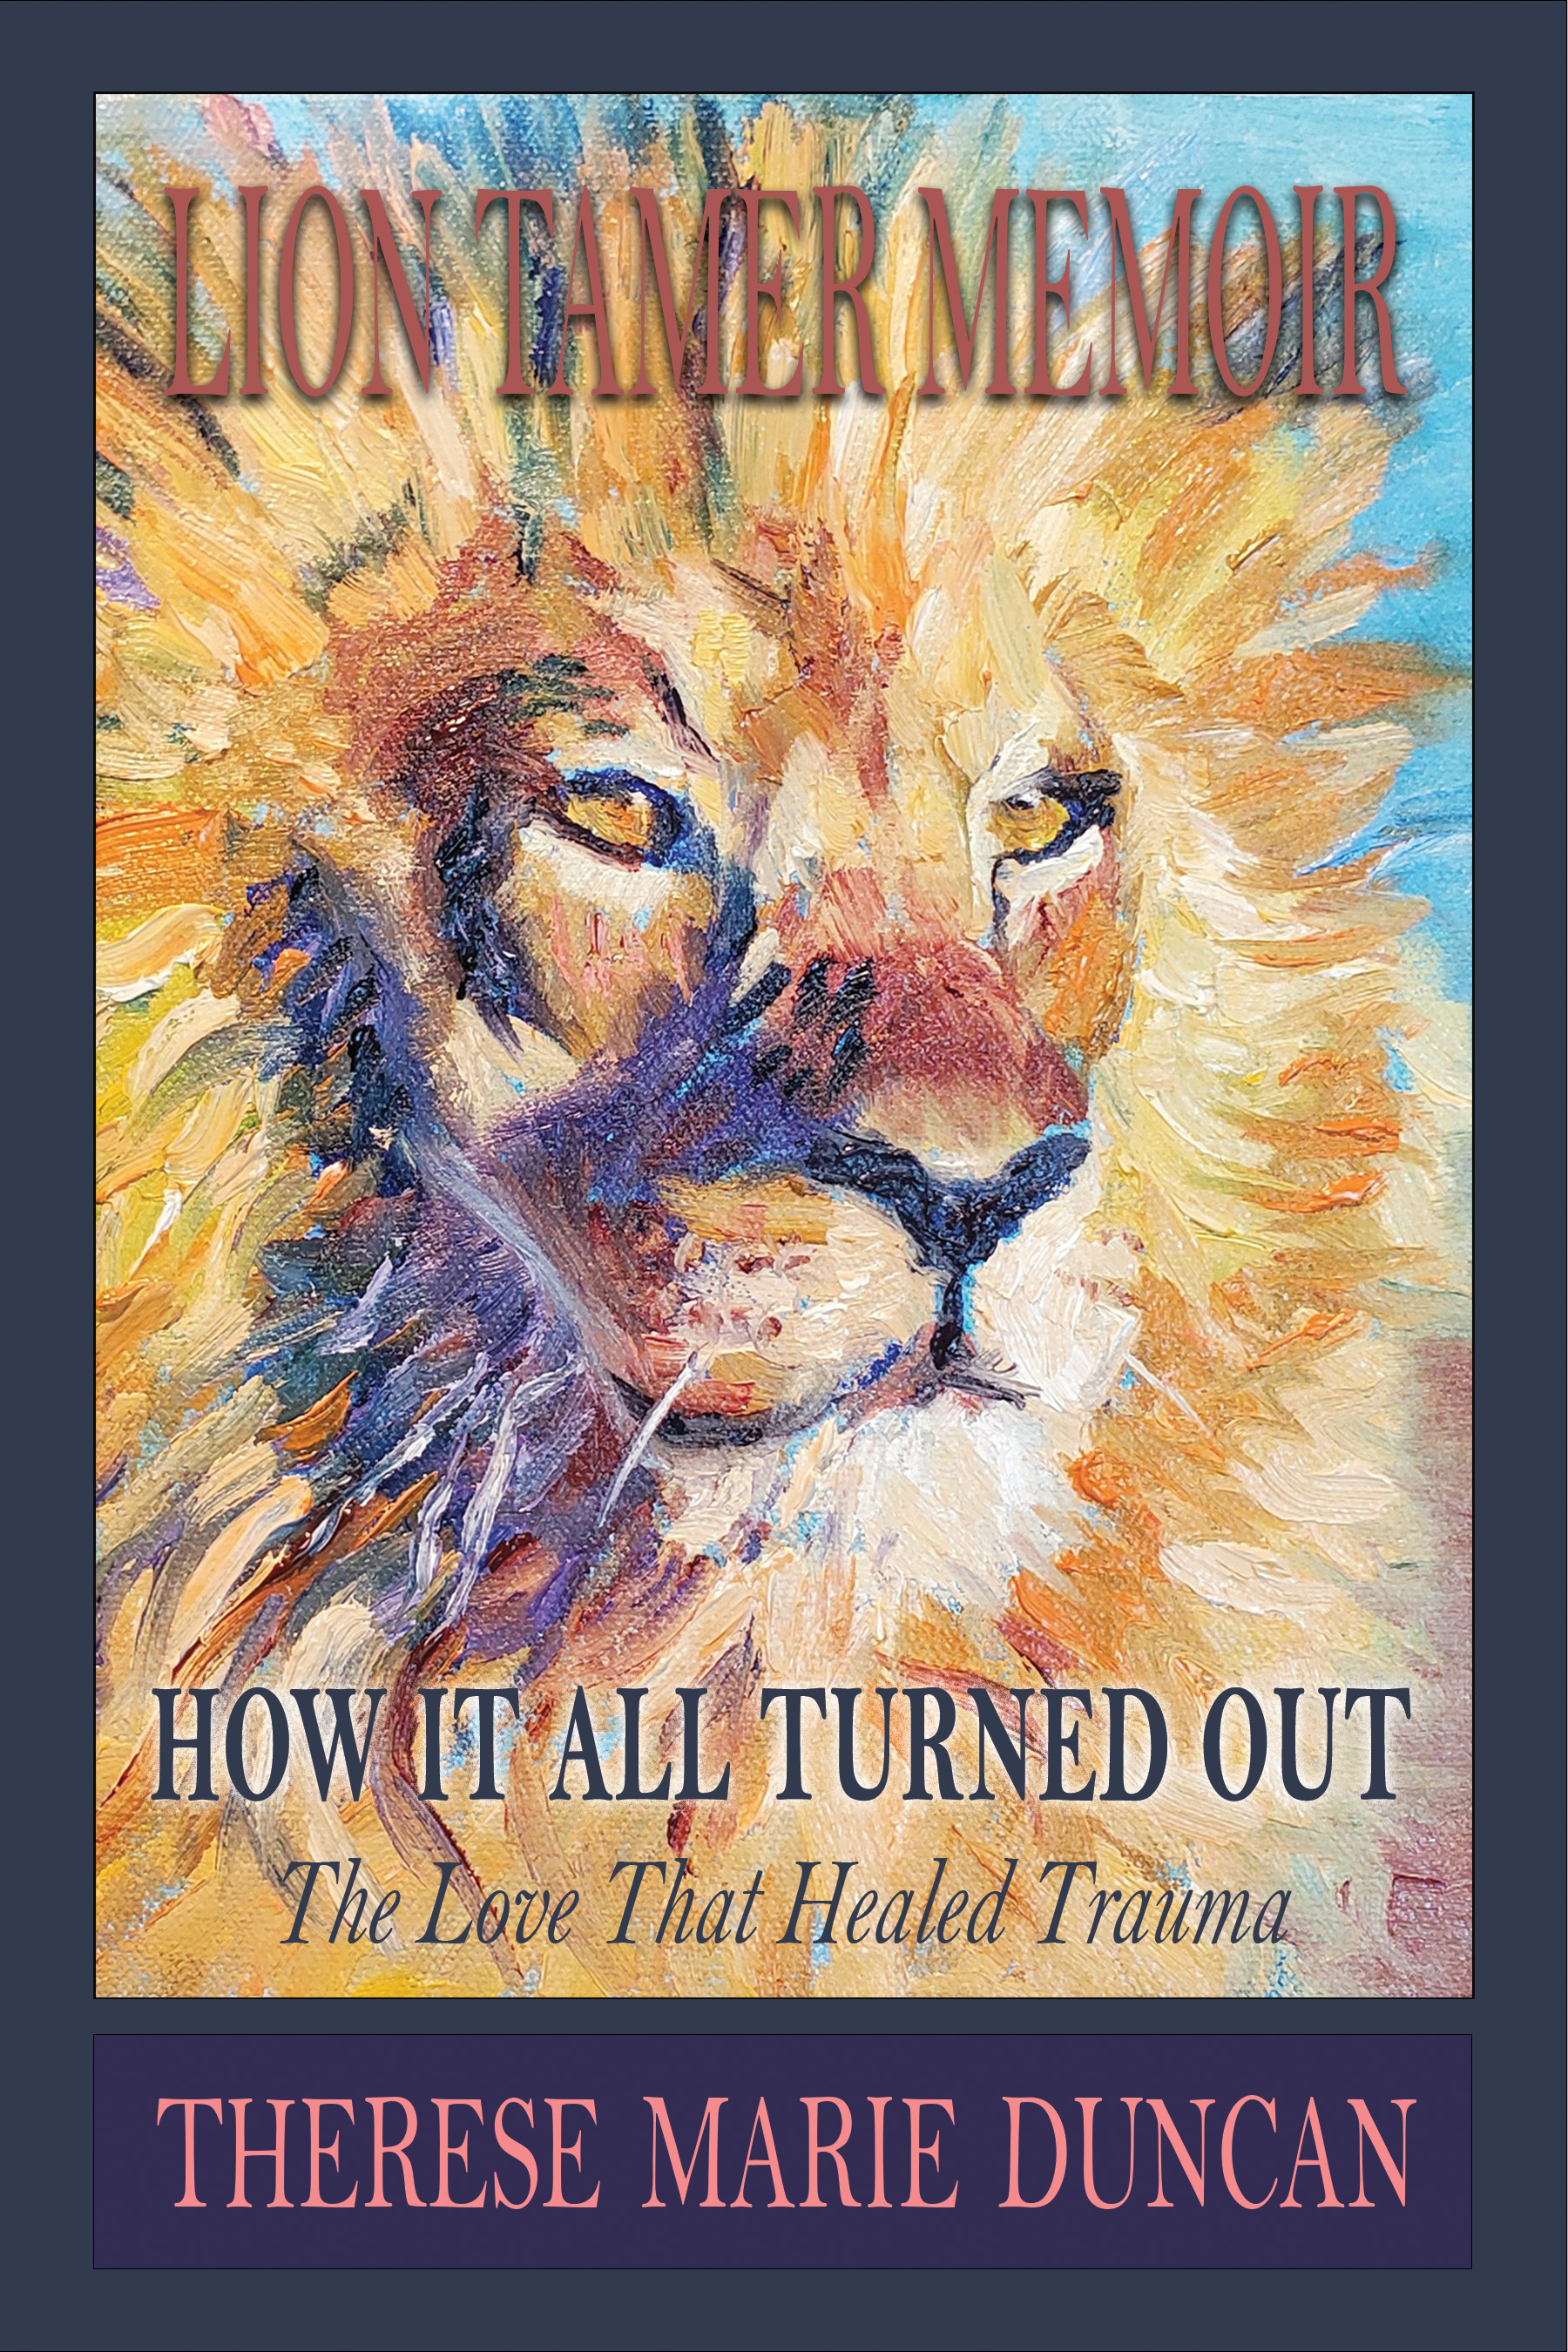 LION TAMER MEMOIR How It All Turned Out, Love that Healed Trauma